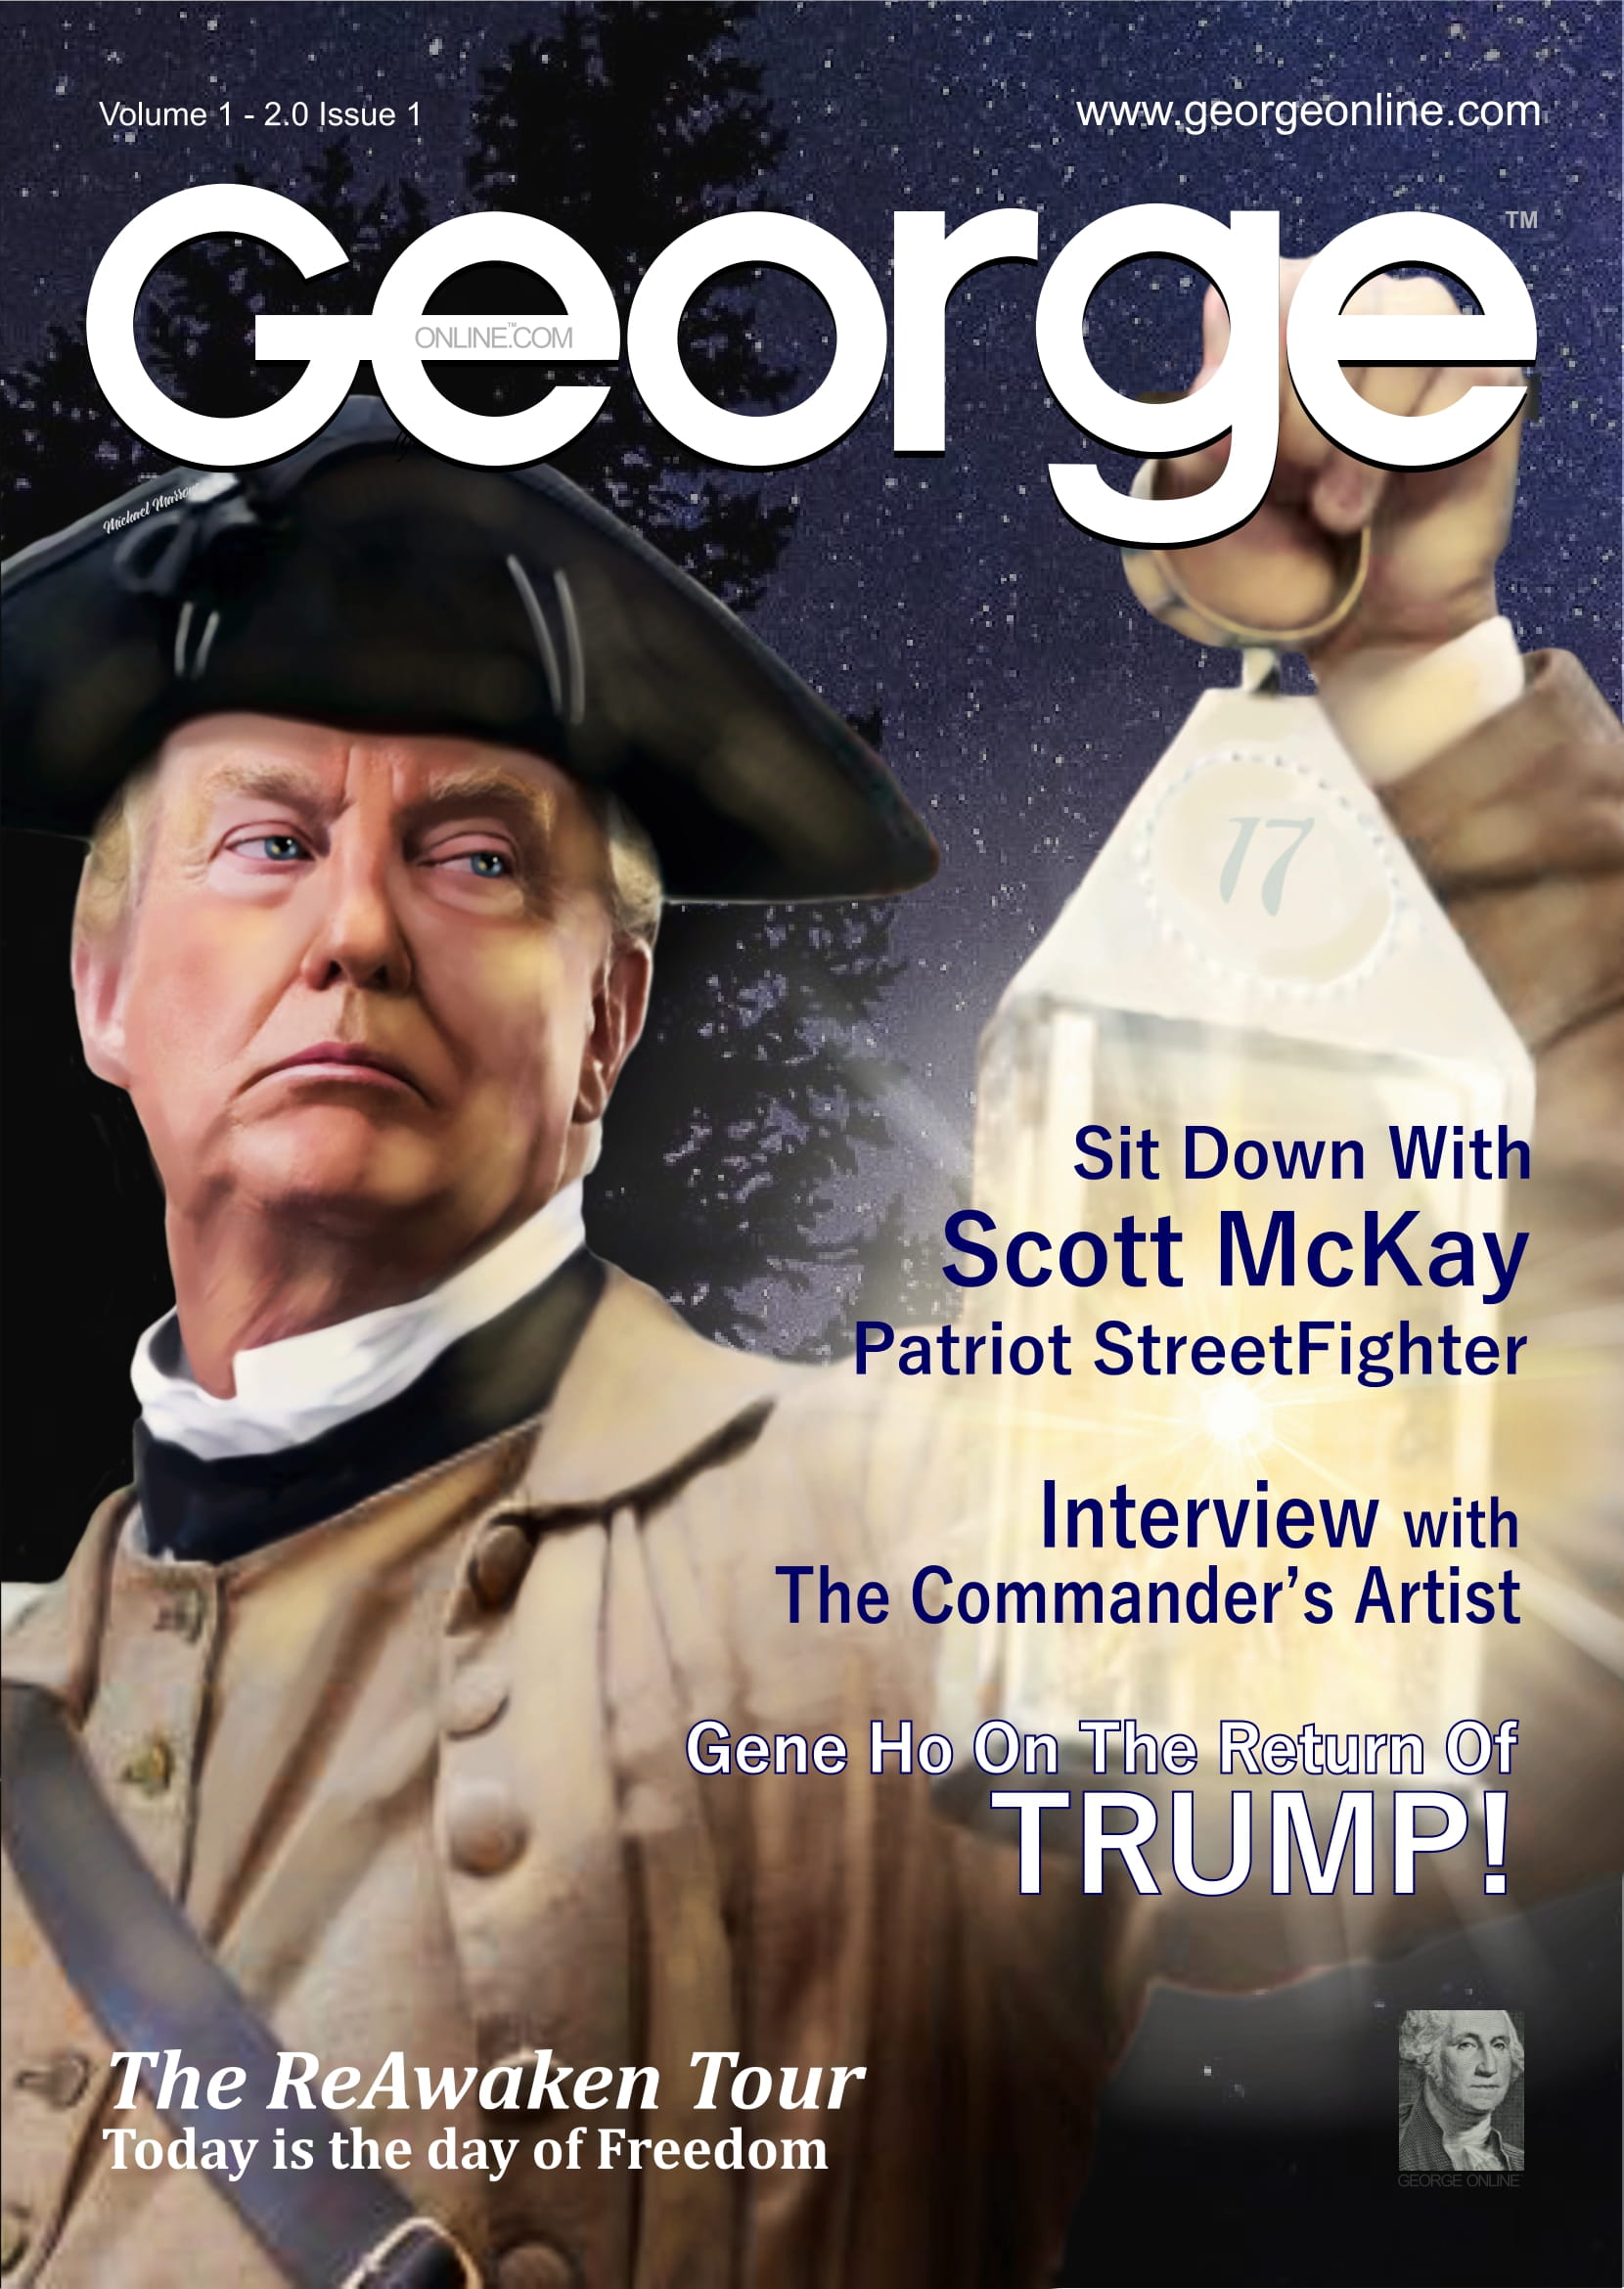 Past George Issues  at george magazine